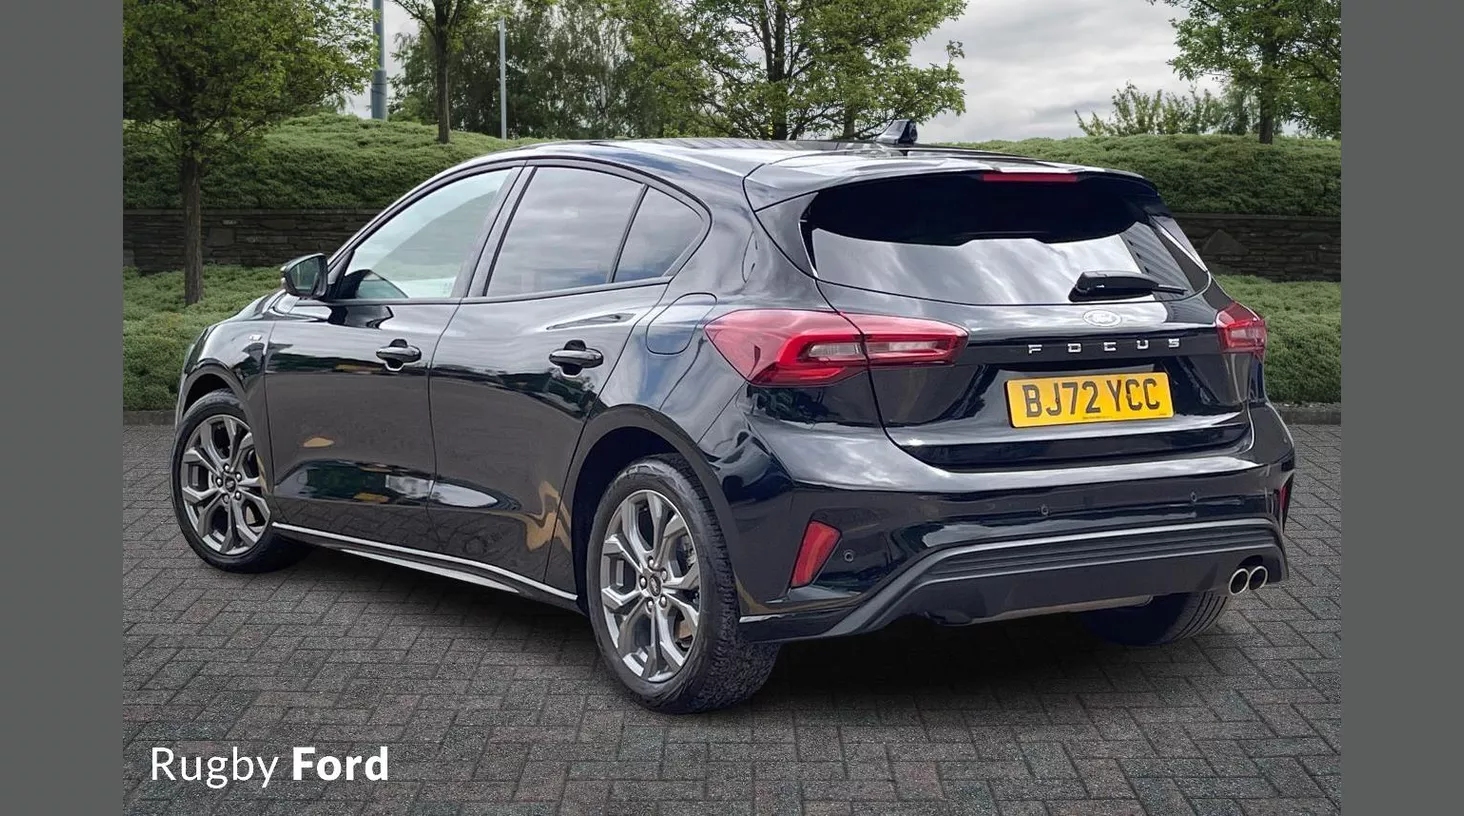 Ford Focus 1.0 EcoBoost ST-Line Style 5dr